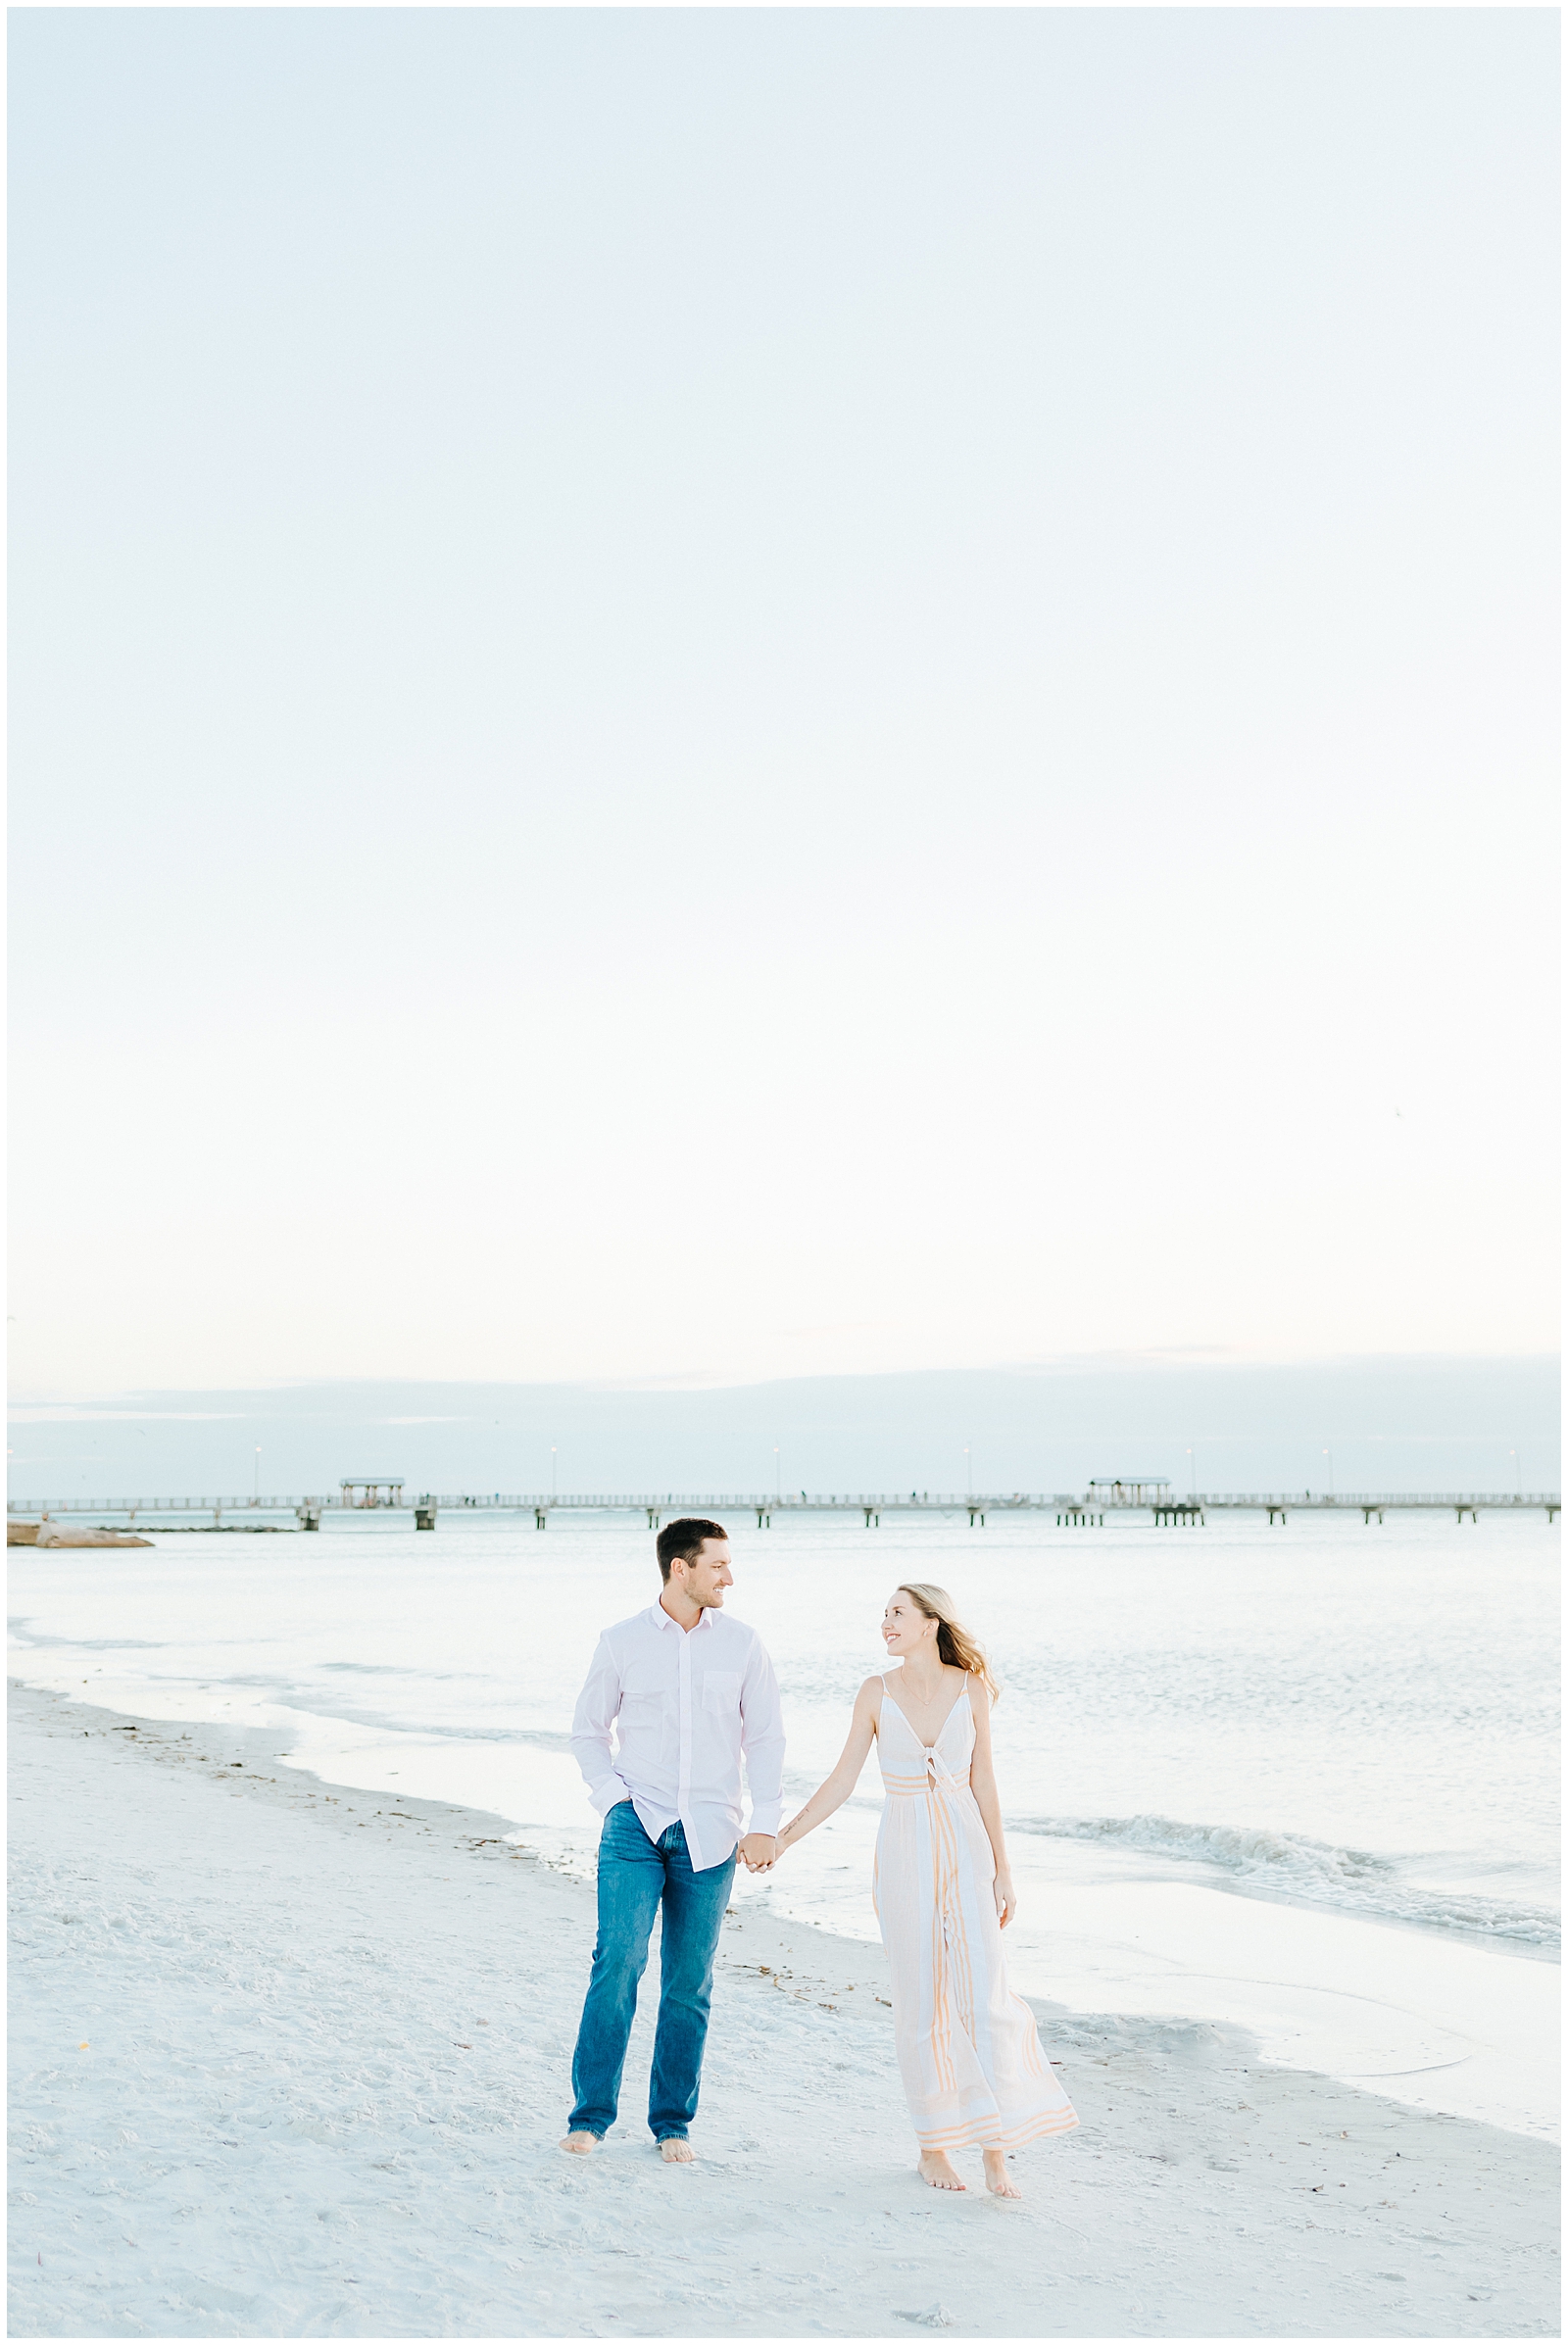 Dreamy Couples Anniversary Session on the beach in St. Petersburg Florida